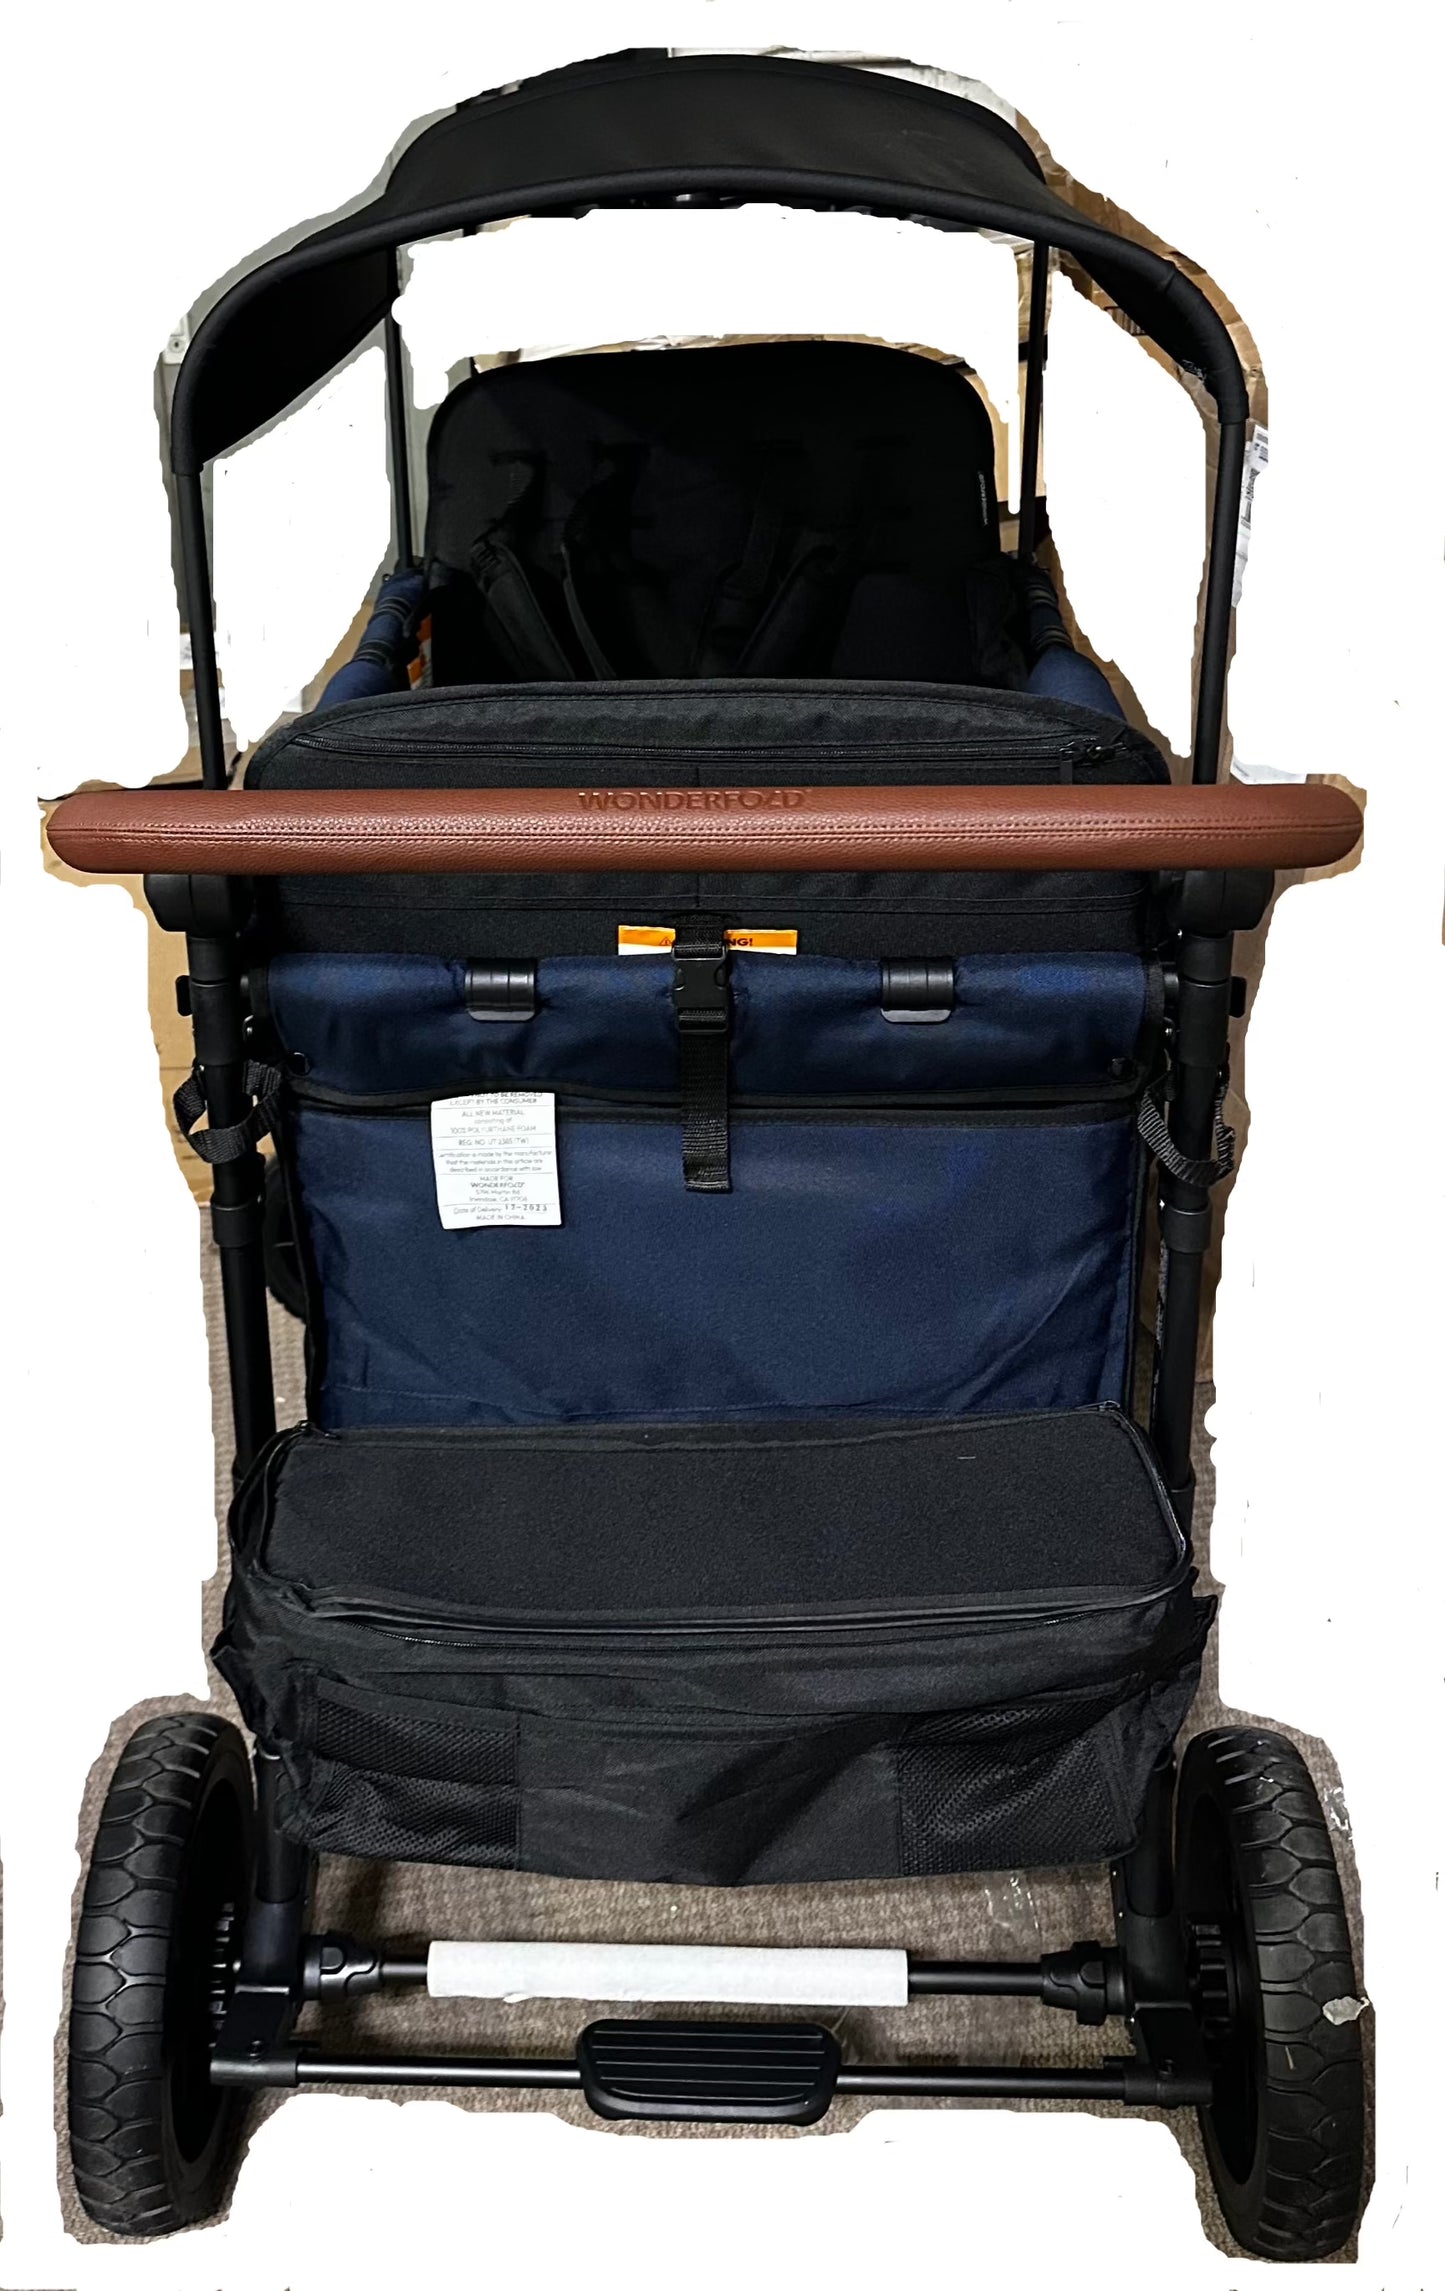 Wonderfold Wagon W4 Luxe Quad Stroller Wagon (4 Seater) - Noble Navy